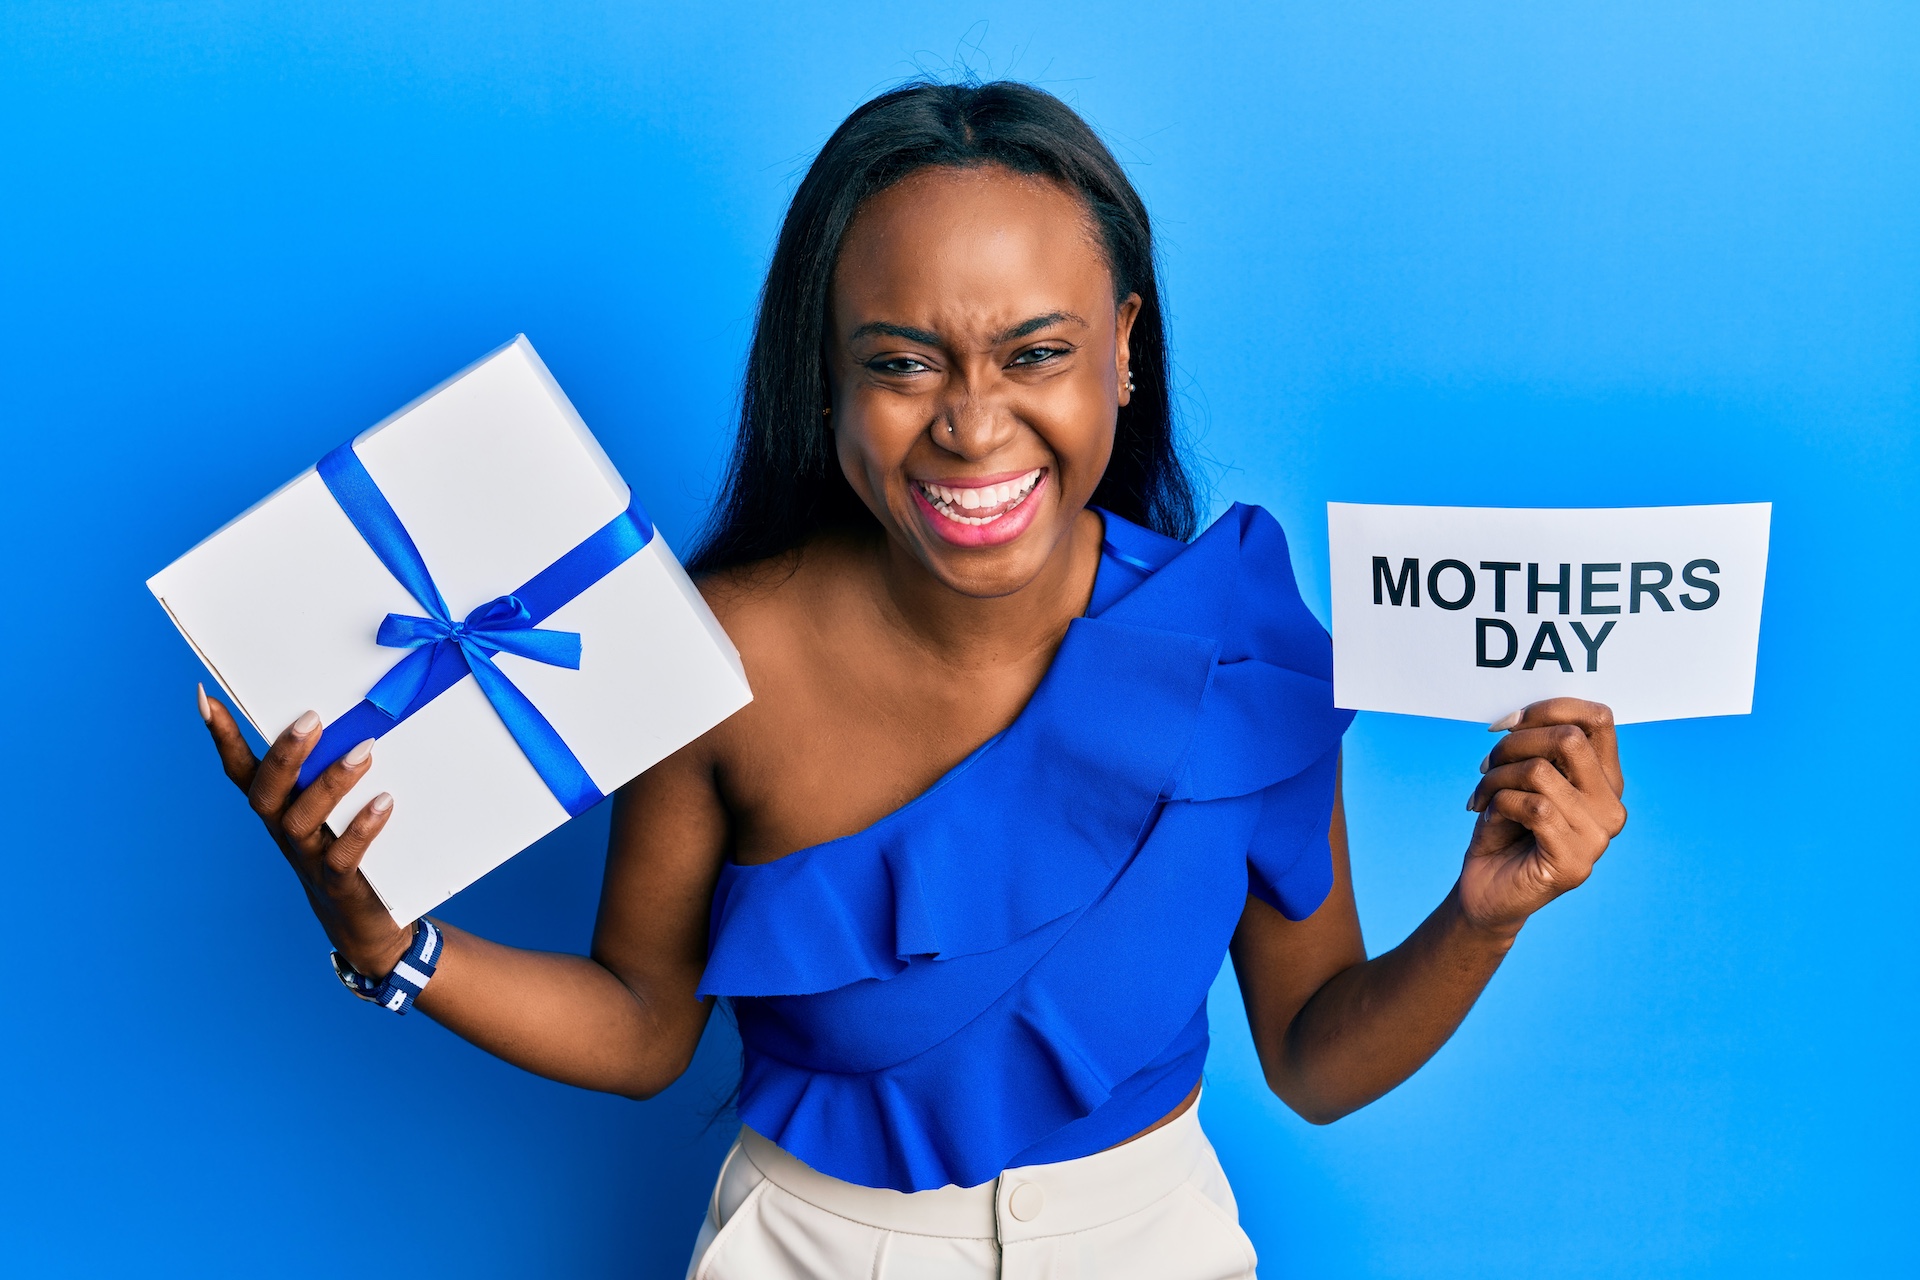 Mother's day, self-care gifts. Young african woman holding gift and mothers day text smiling and laughing hard out loud because funny crazy joke.